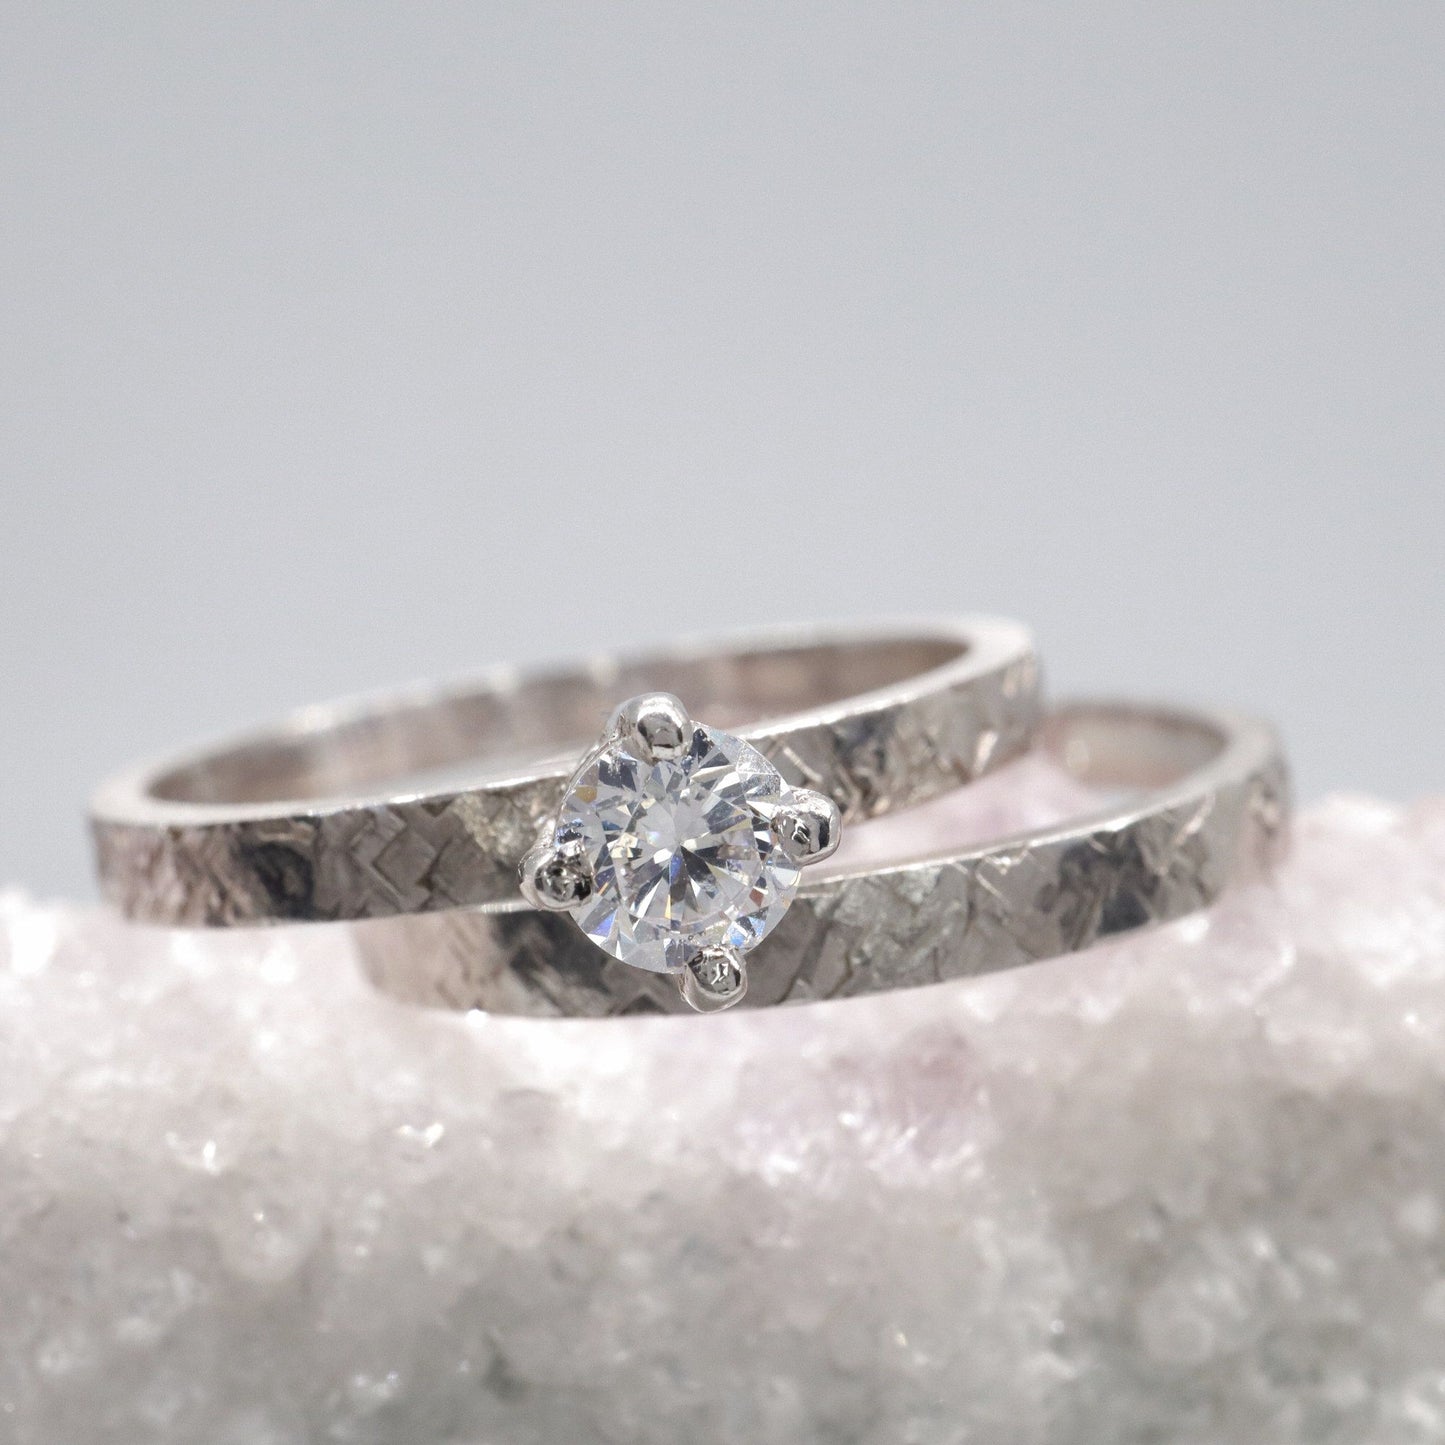 Bridal white gold diamond solitaire and wedding ring Kendal design set